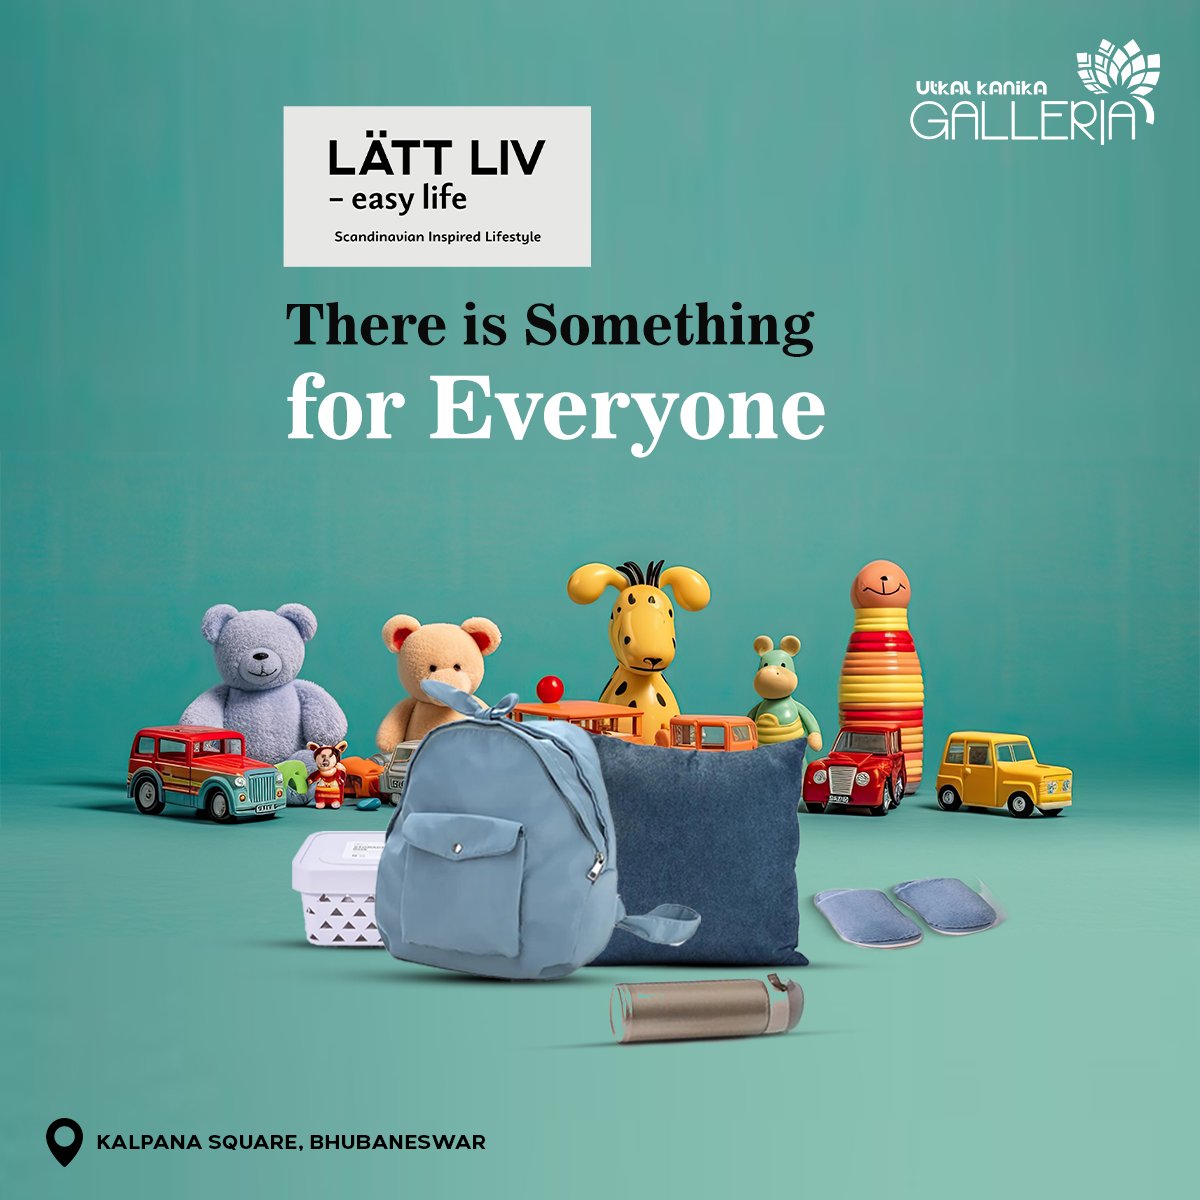 We believe in making your everyday extraordinary. Why wait? 

A shopping experience where quality and affordability go hand in hand.

#LattLiv #LifeEnhanced #AffordableLuxury #HomeDecor #UtkalKanikaGalleria